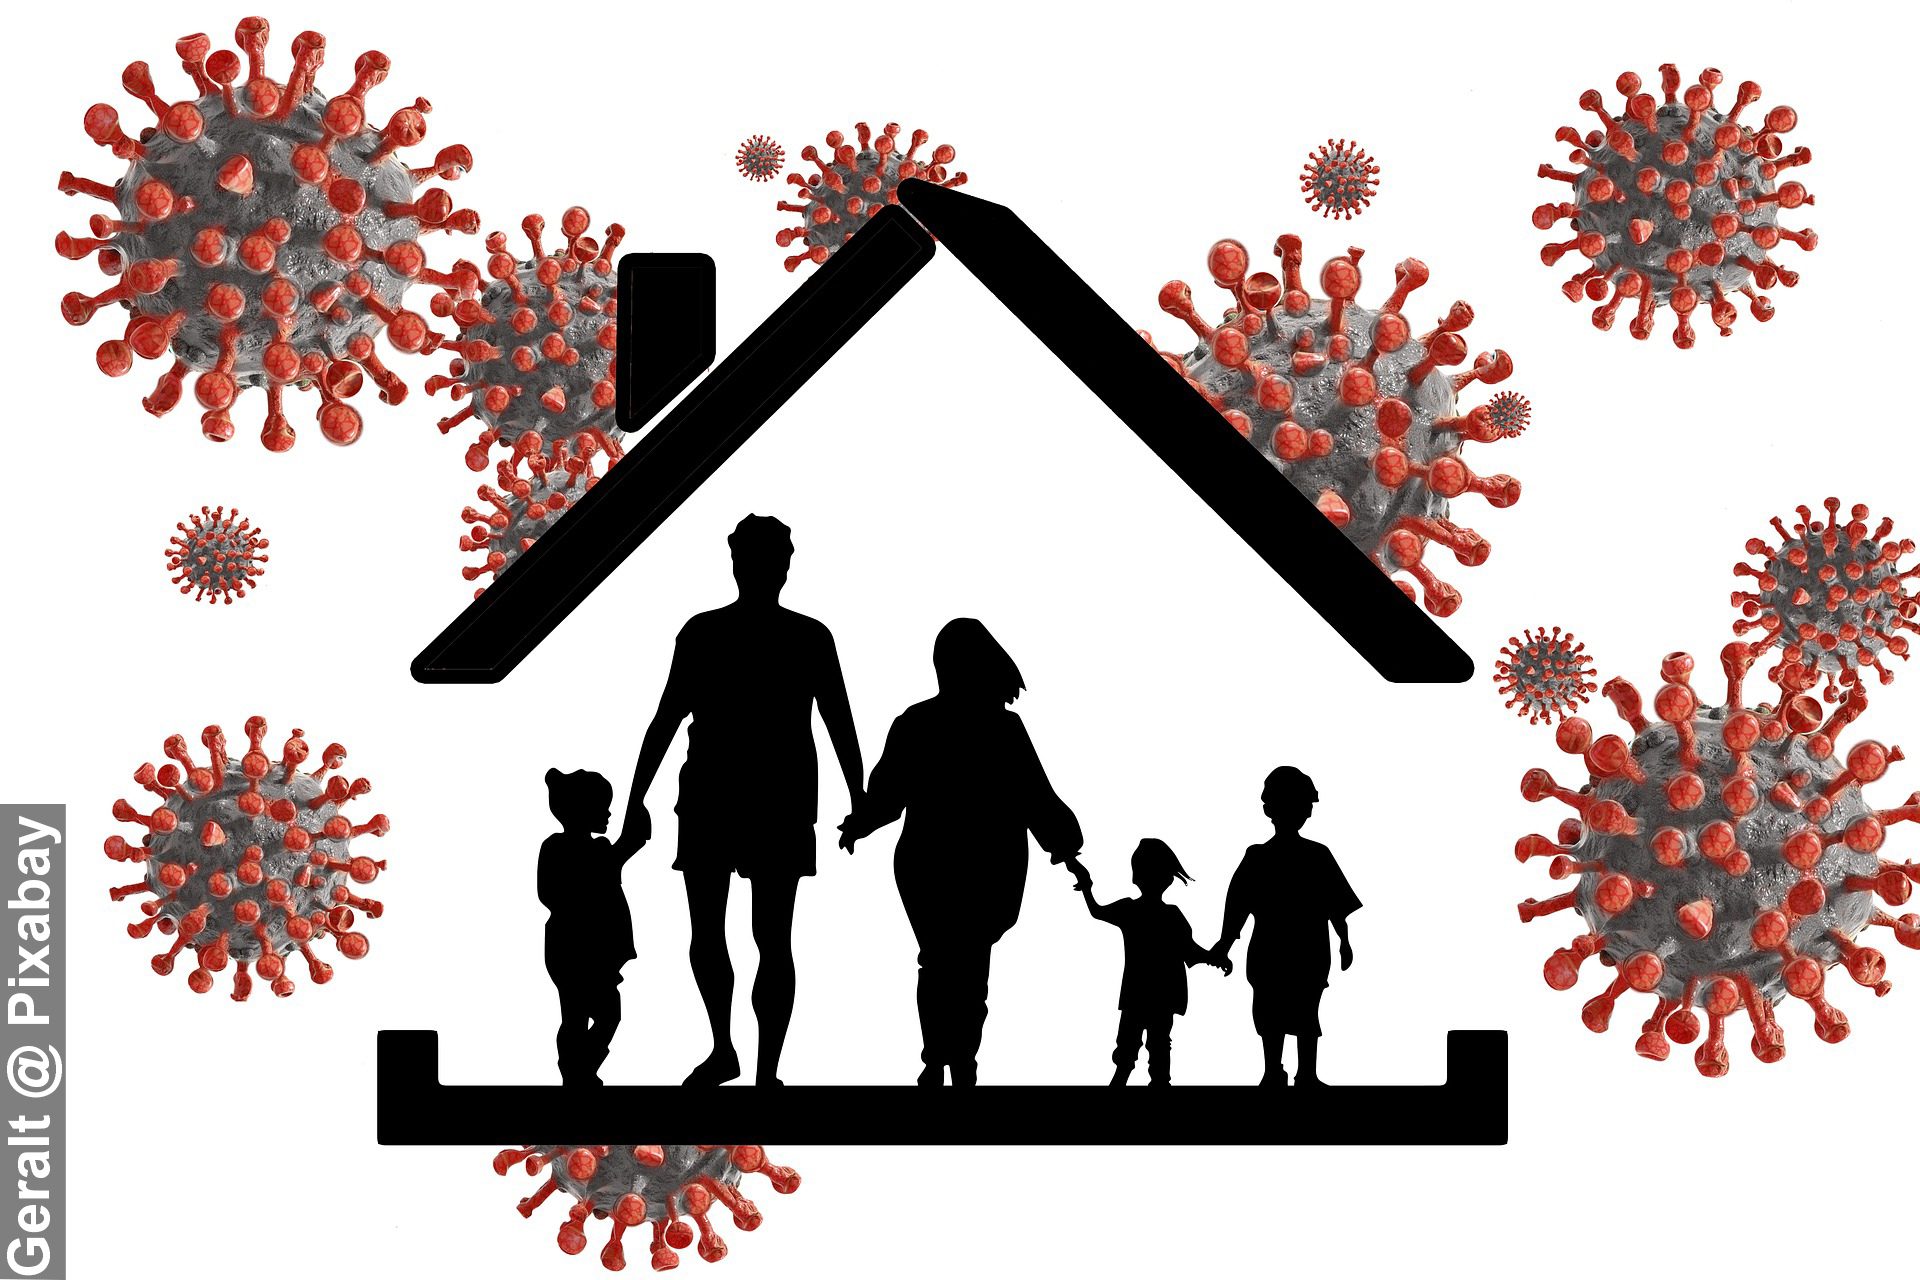 Keep Your Family Safe in House with Virus all around you